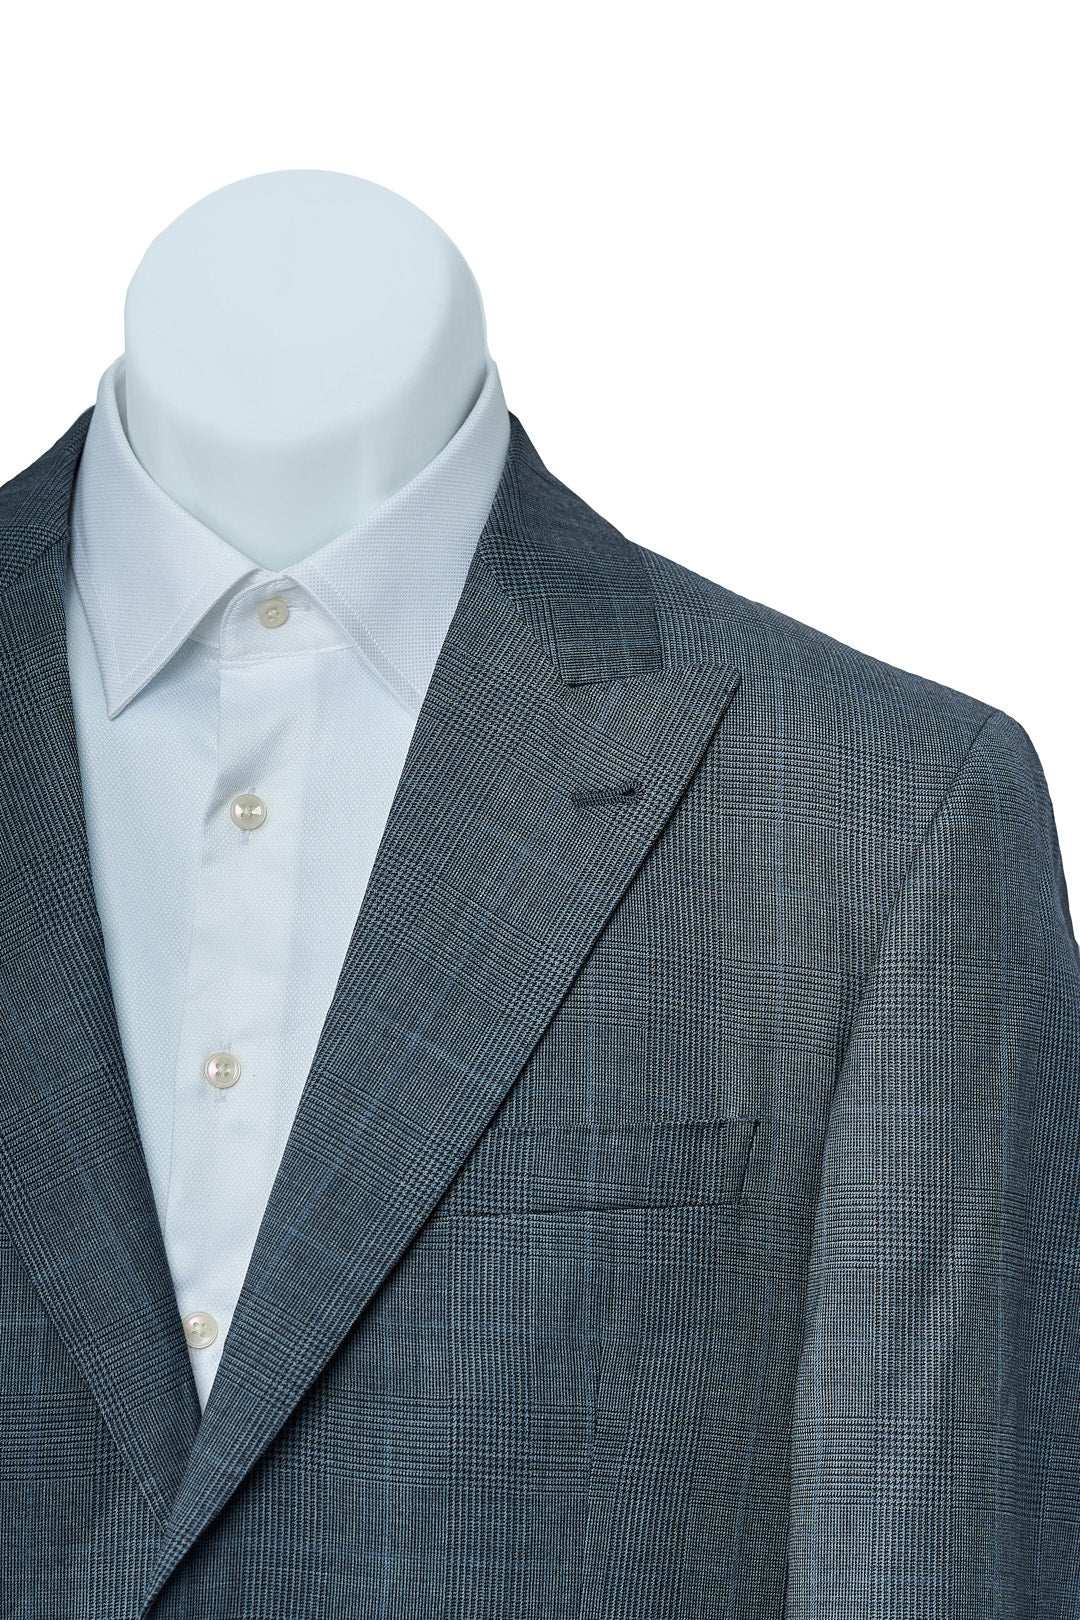 Gray & Blue Square Patterned Wool Suit